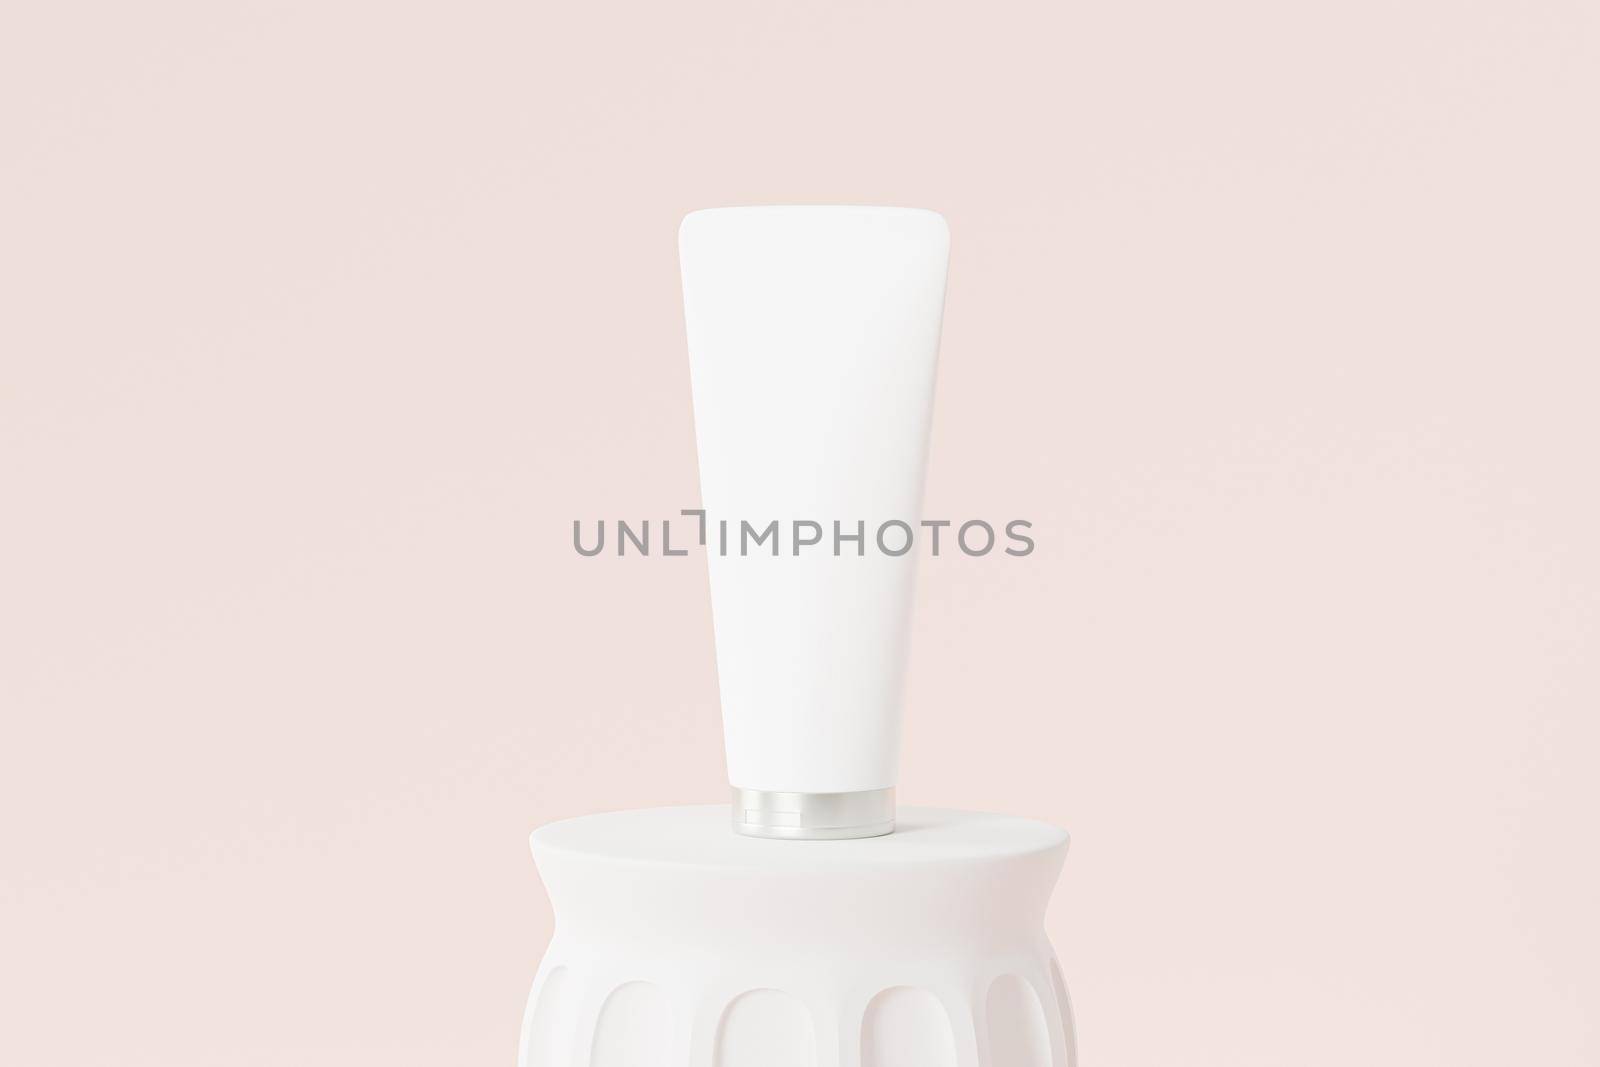 Mockup lotion tube for cosmetics products, template or advertising on pillar podium, minimal 3d illustration render by Frostroomhead